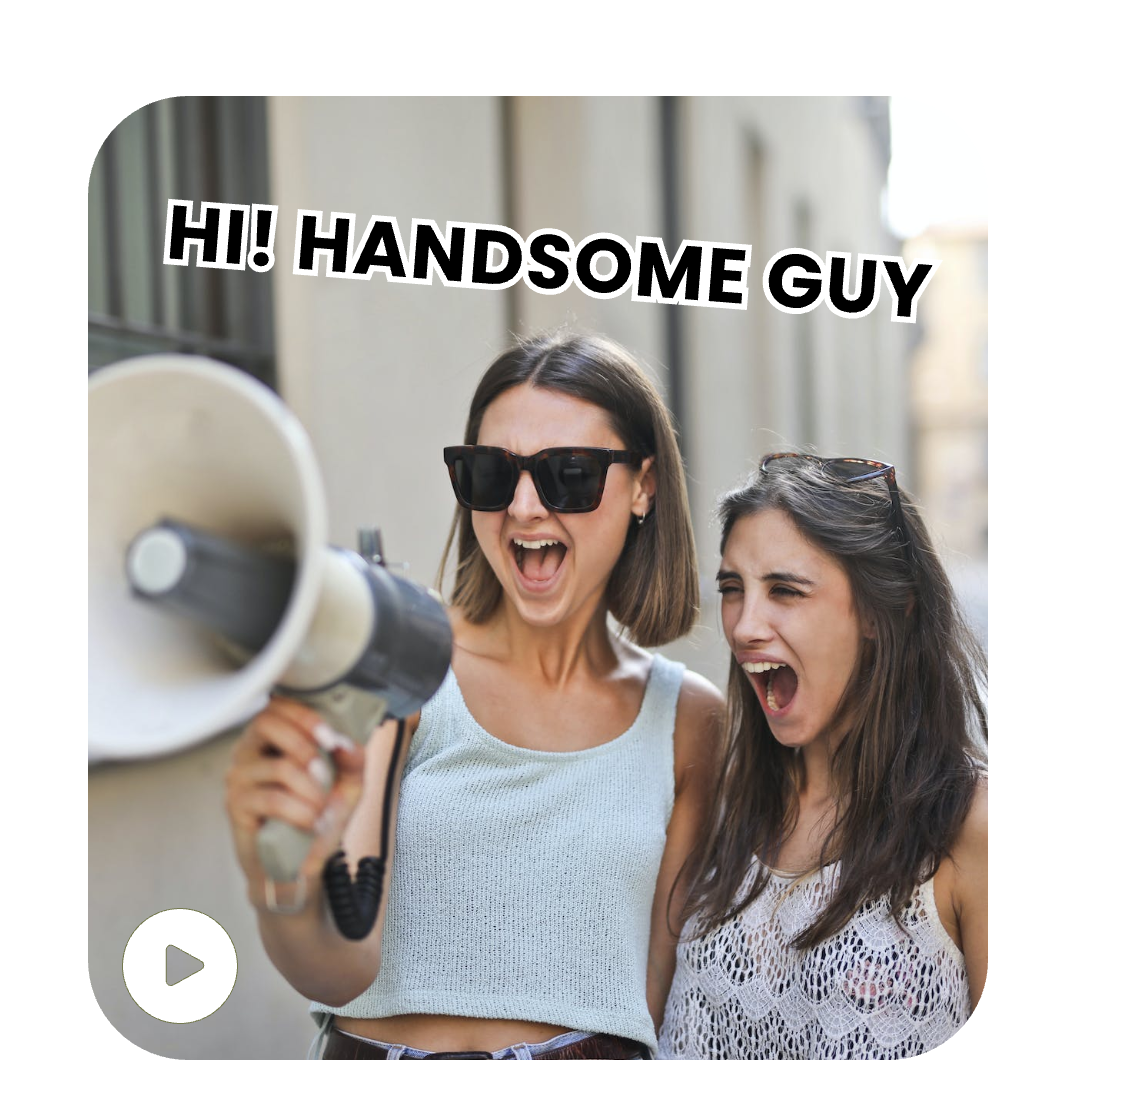 a meme video of two girls who are screaming about a handsome guy